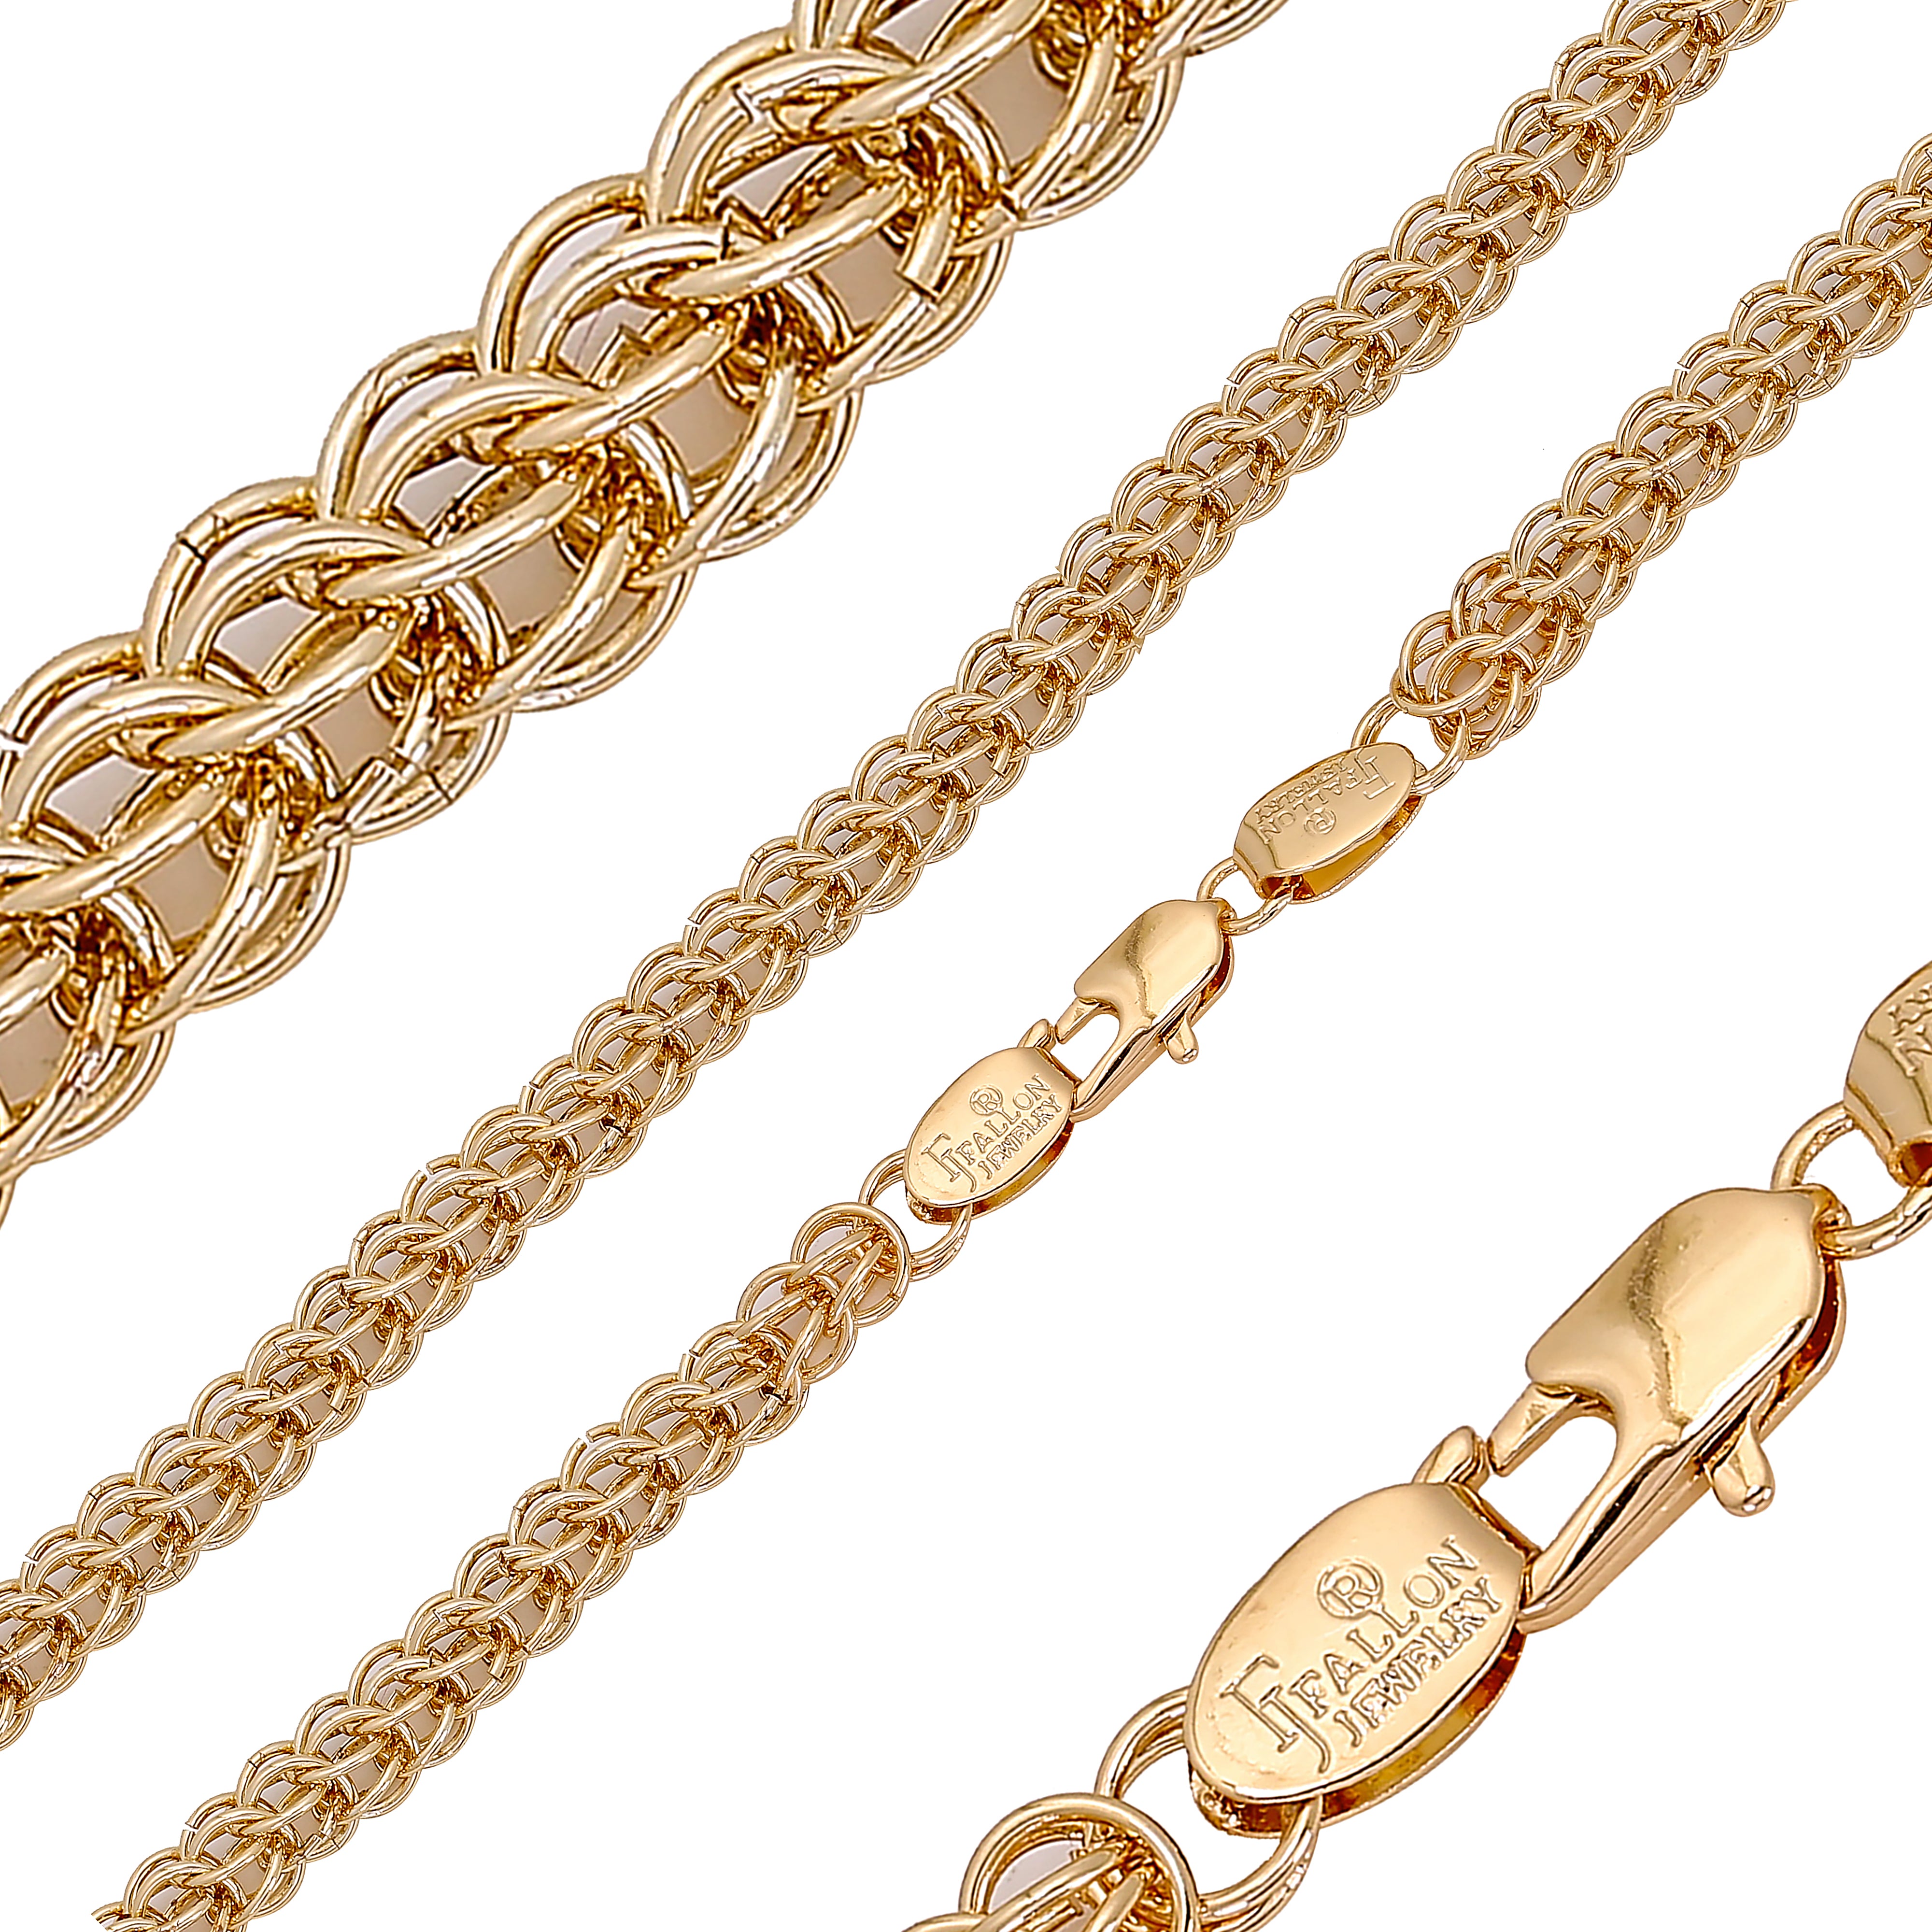 Cable double ring Bismarck rolo link chains plated in 14K Gold, Rose Gold